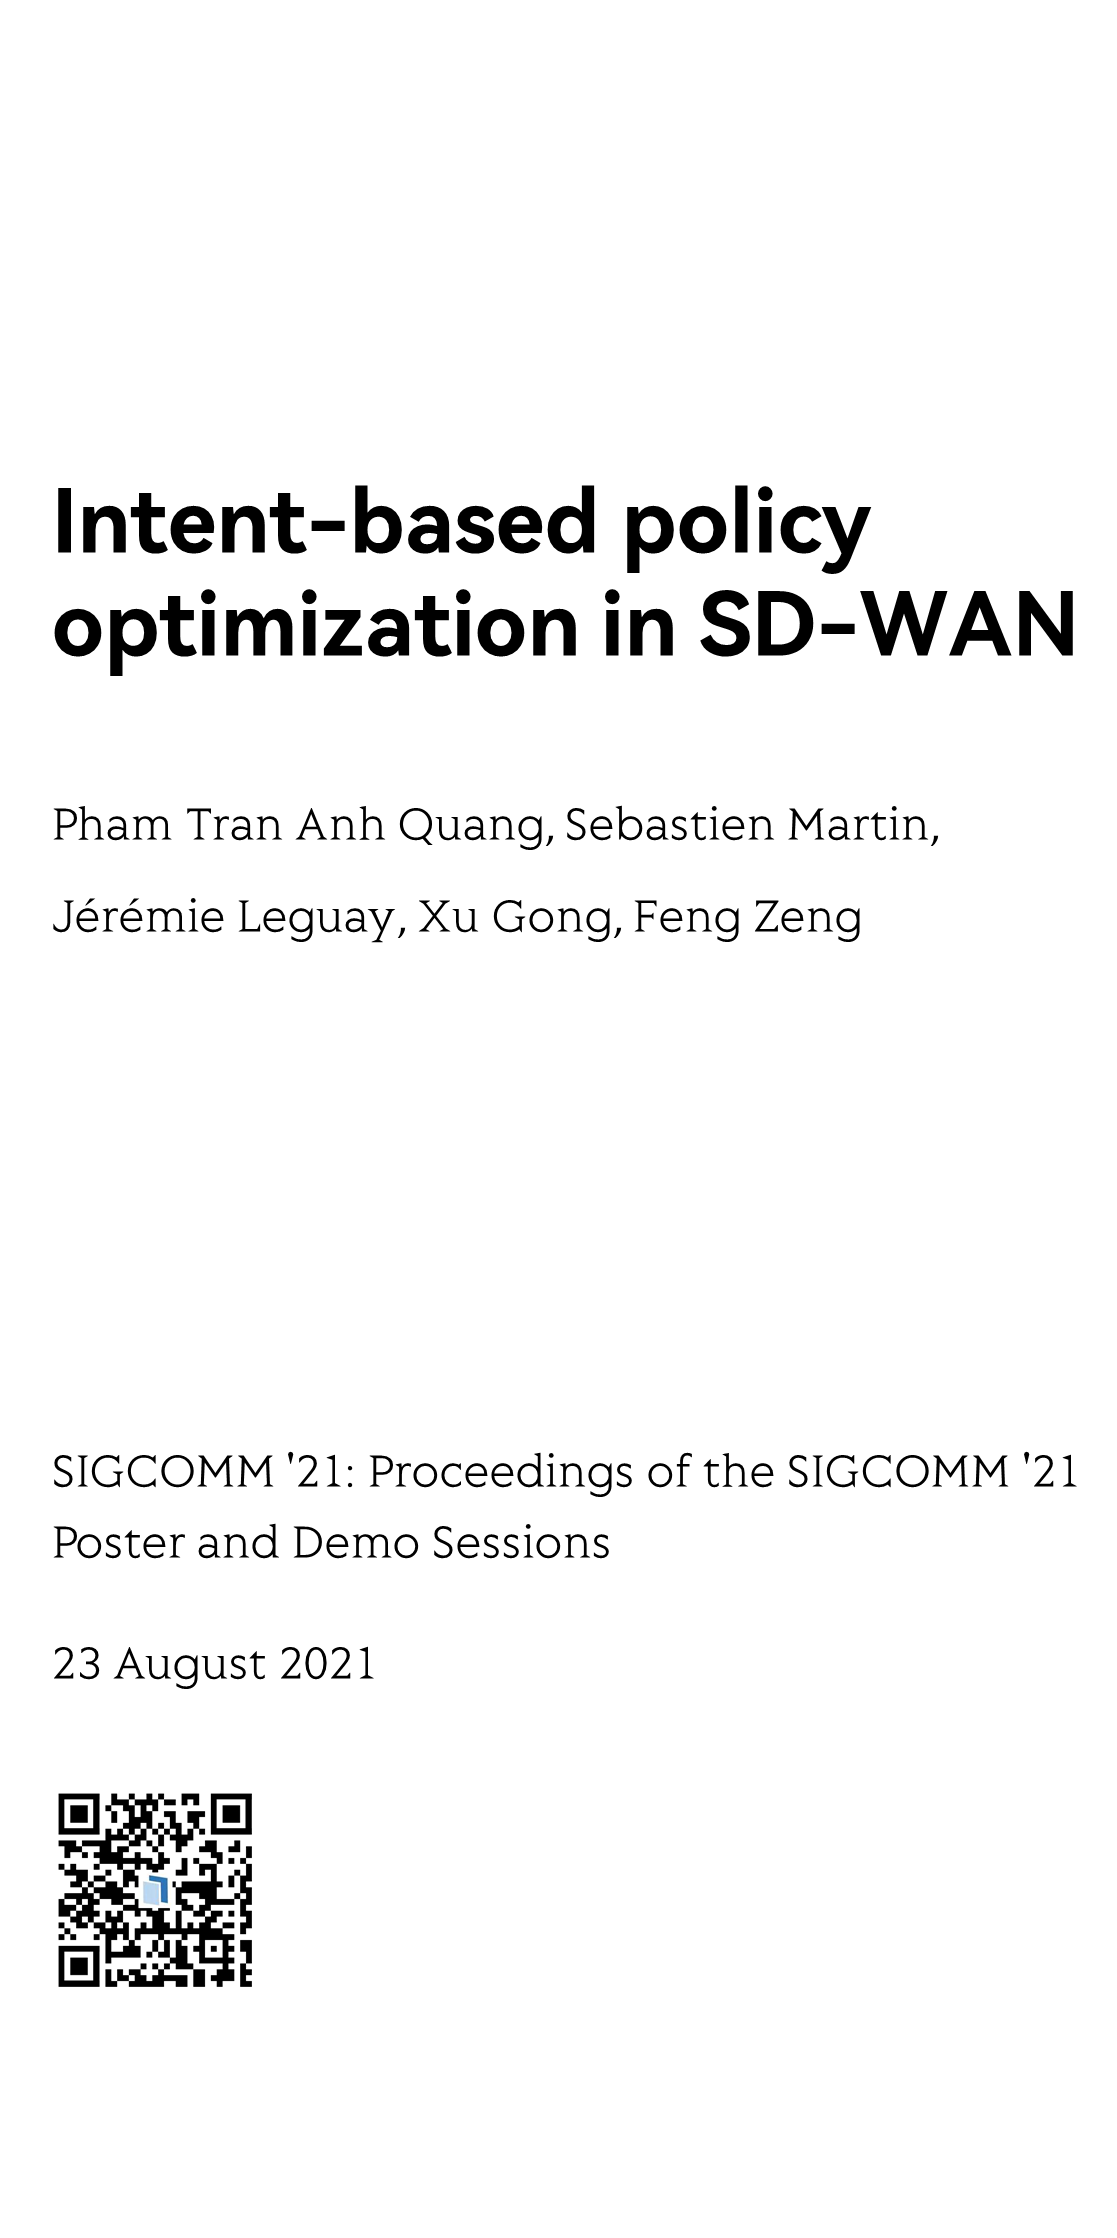 SIGCOMM '21: Proceedings of the SIGCOMM '21 Poster and Demo Sessions_1